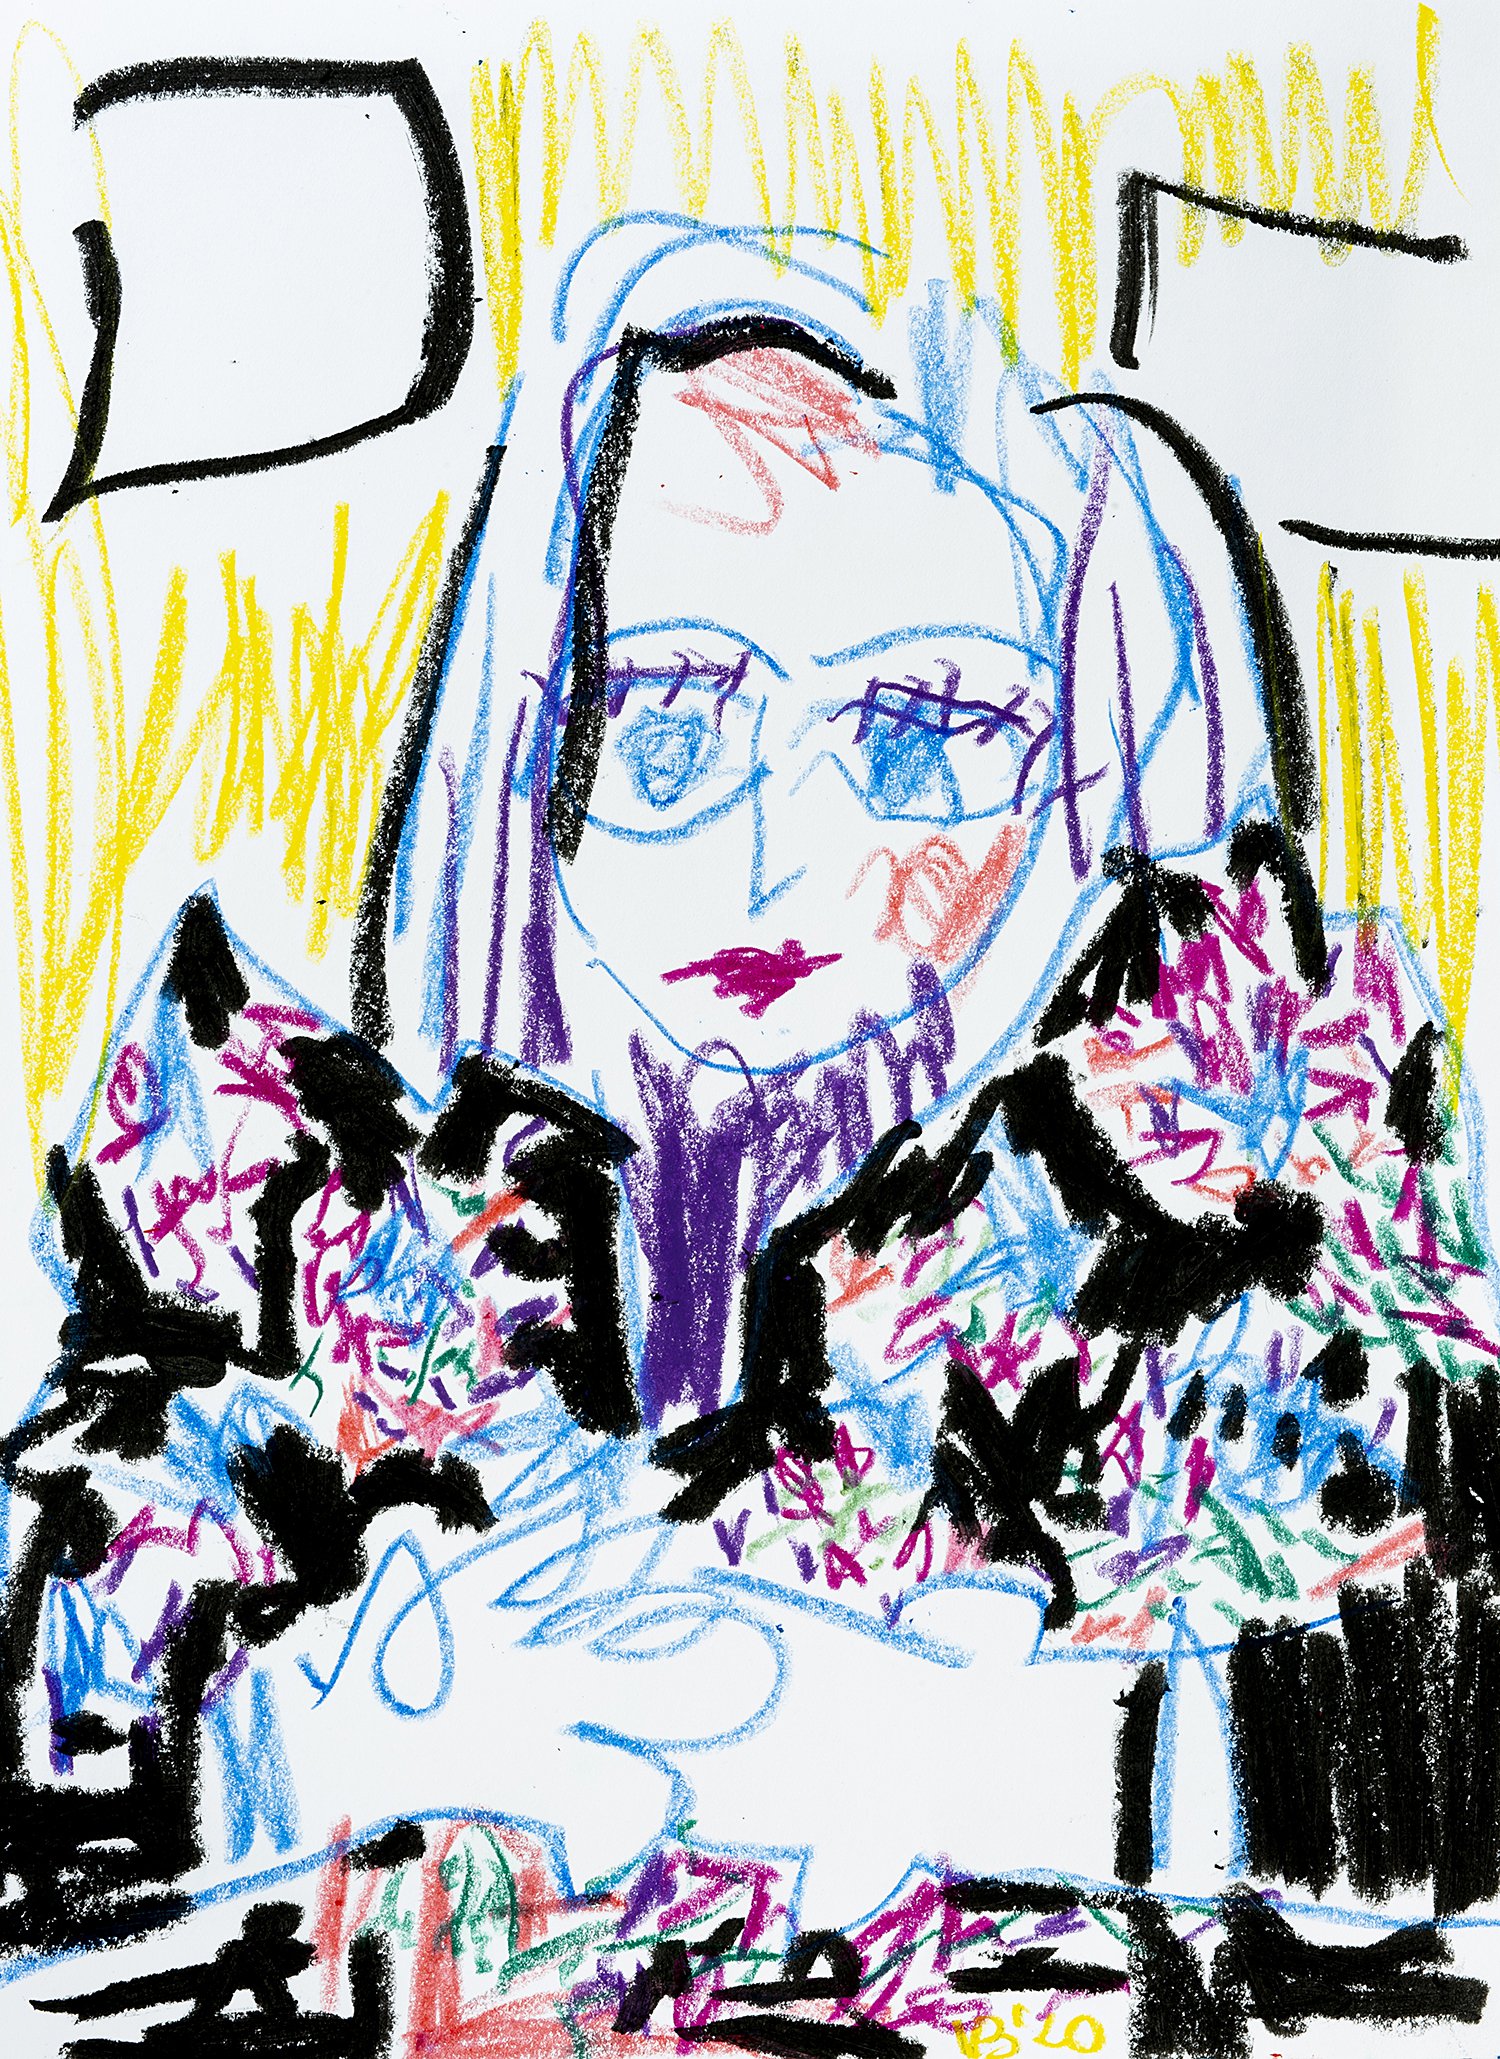 Girl in a Flower Dress, 2020 - crayon and tempera sticks on paper, 10.5x14.2in